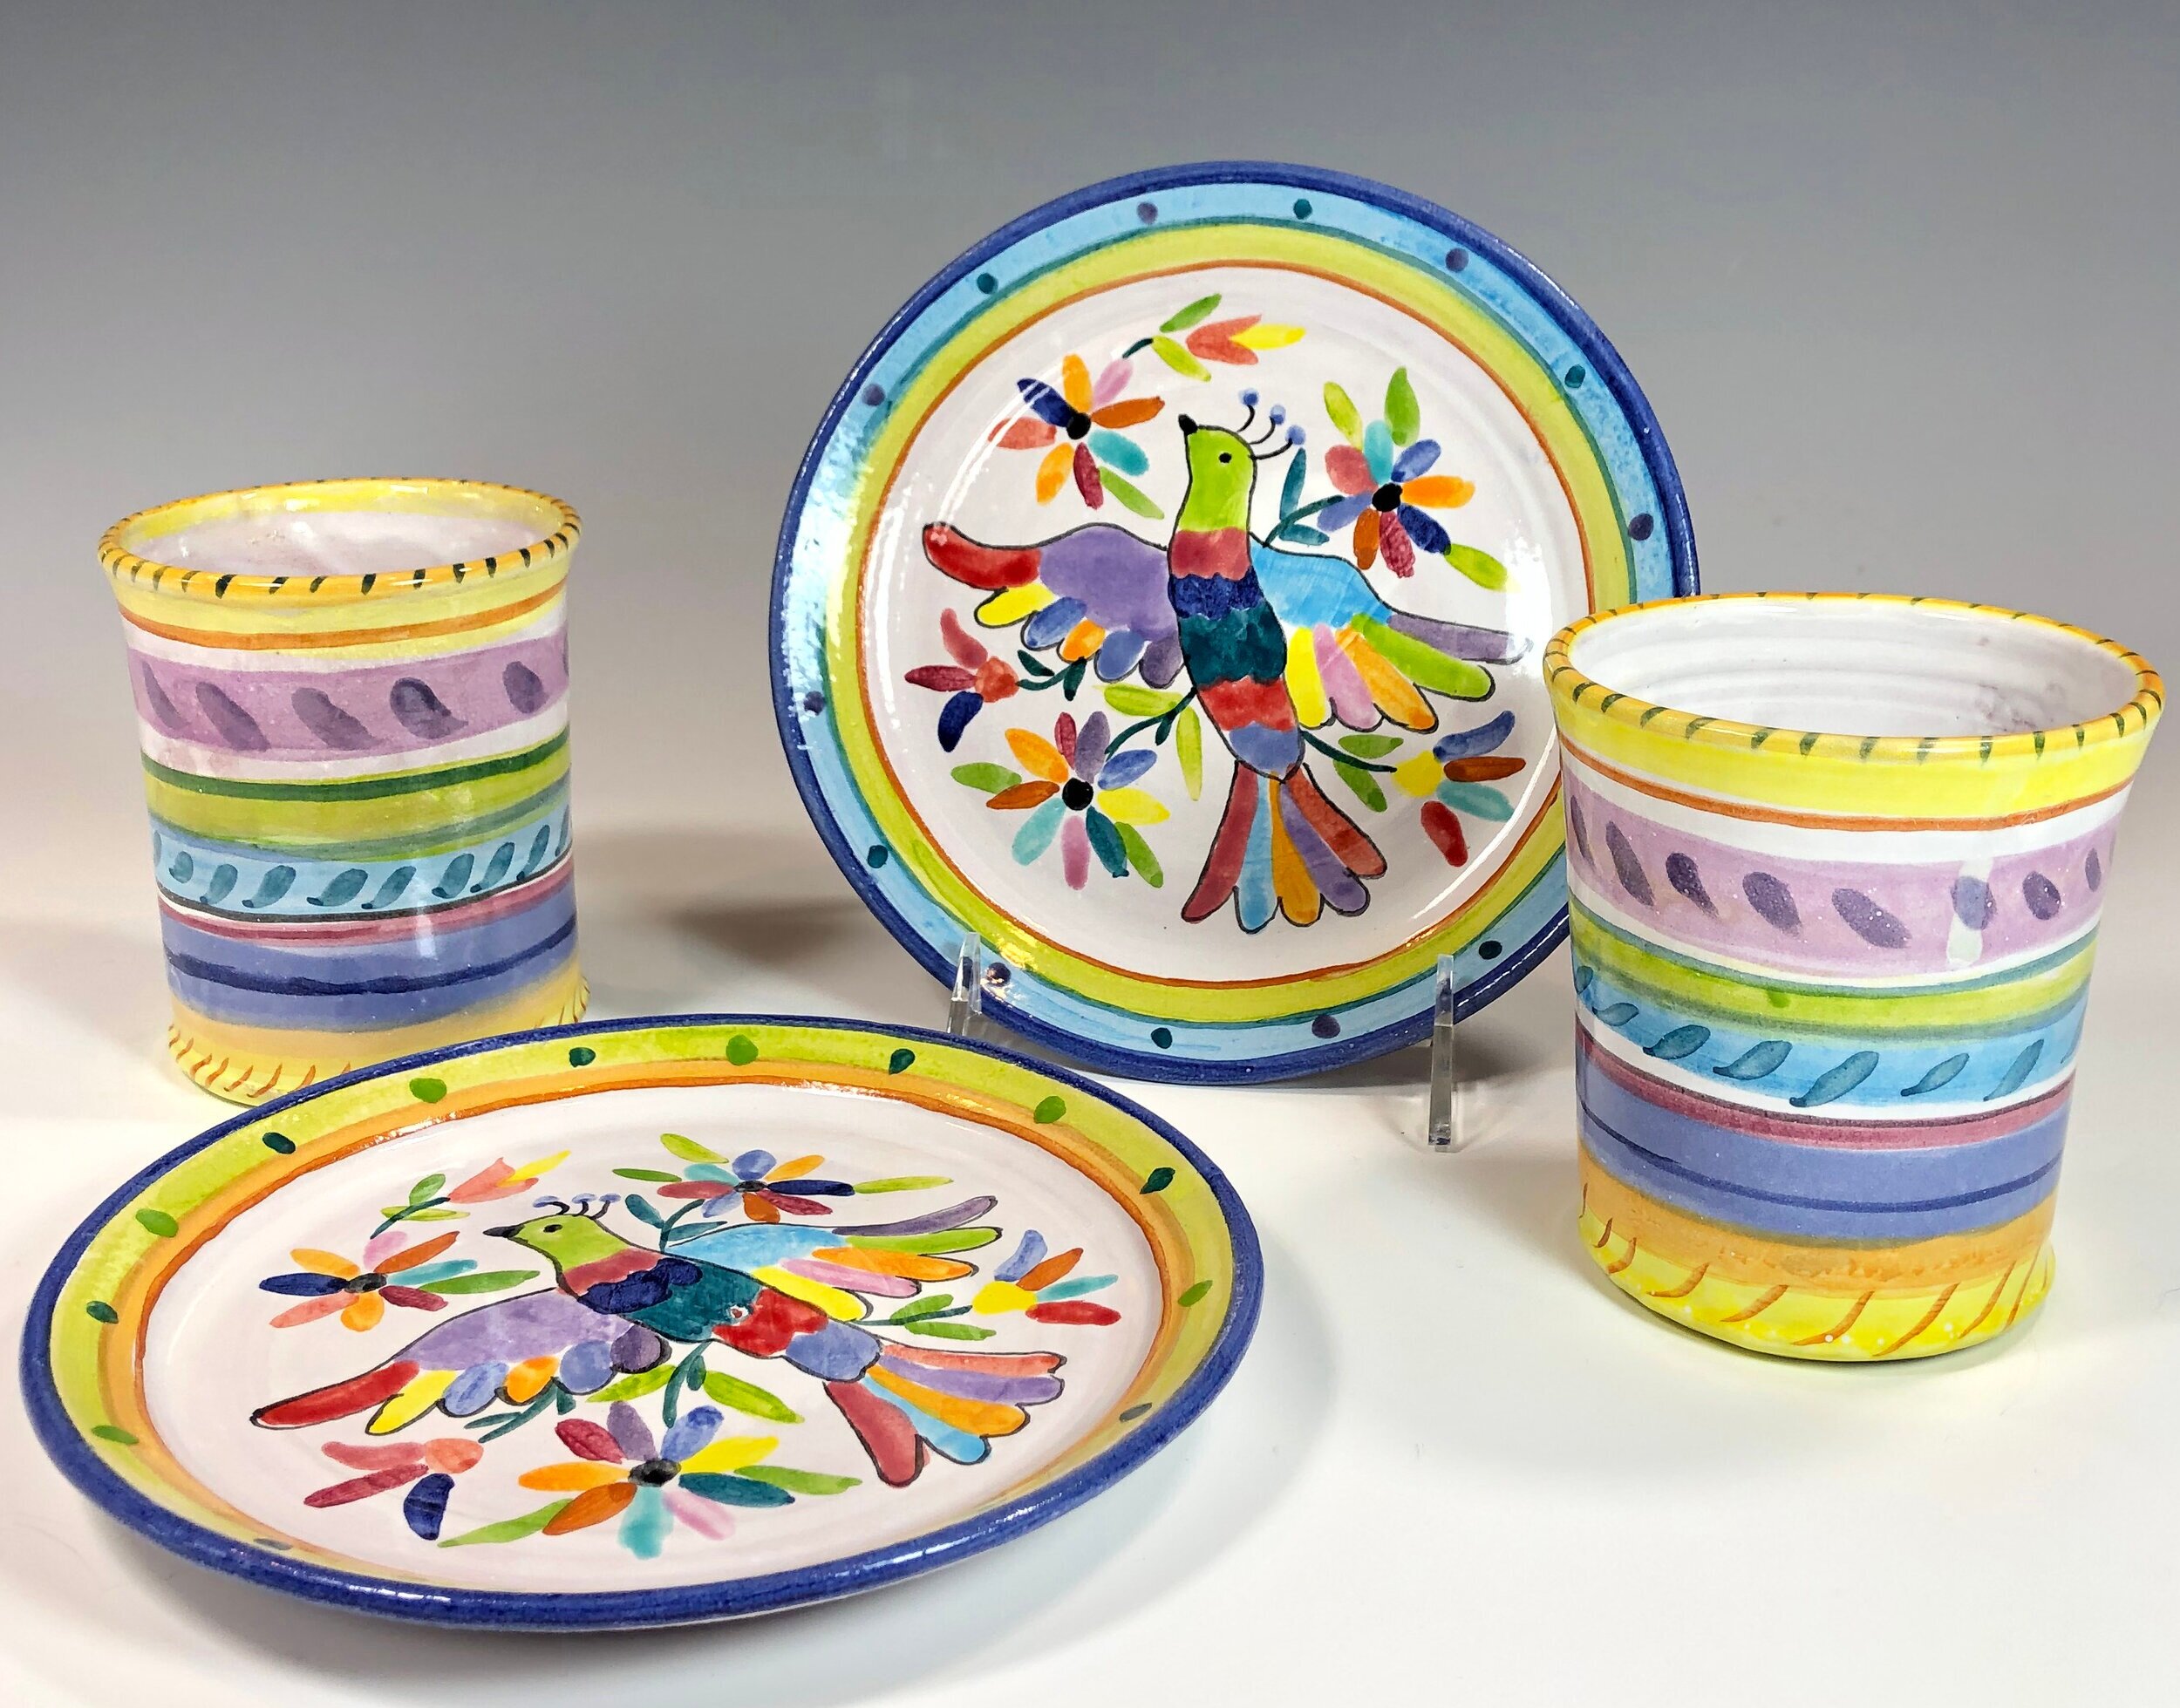 Folkart+plate+set+with+cups.jpg